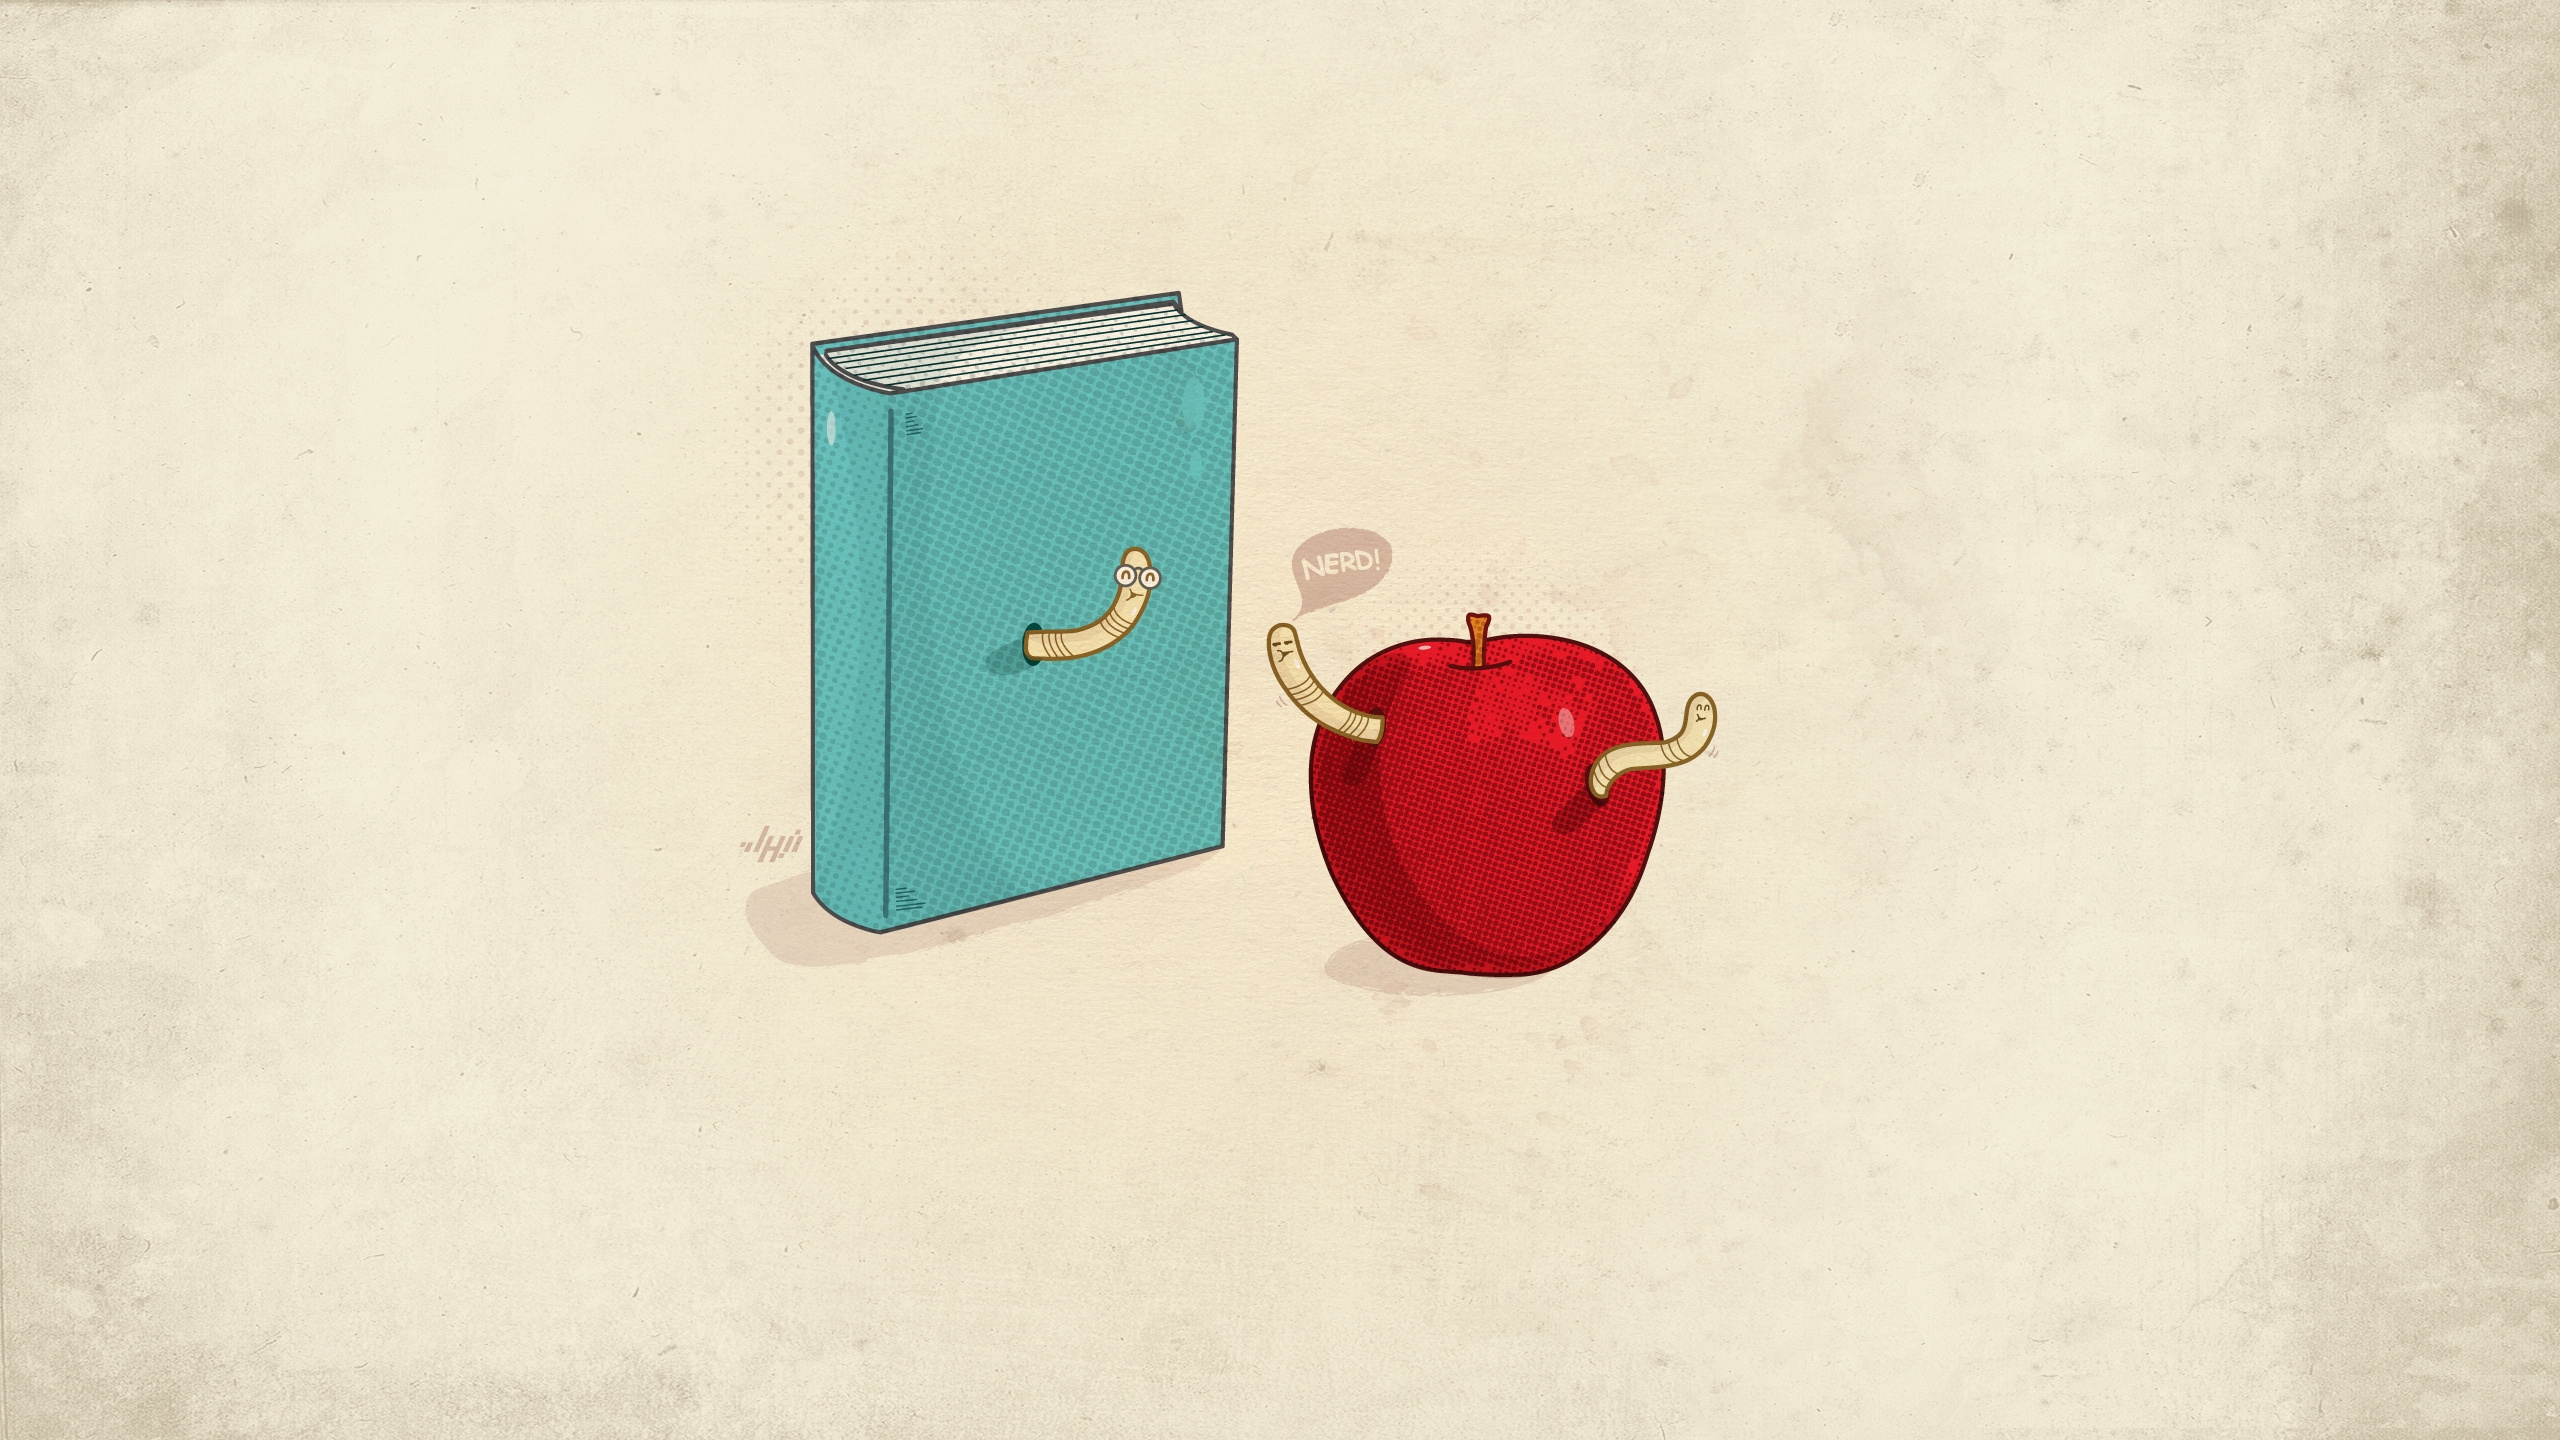 Wallpaper, drawing, illustration, minimalism, red, green, blue, Worms, color, apple, book, shape, sketch, organ 2560x1440